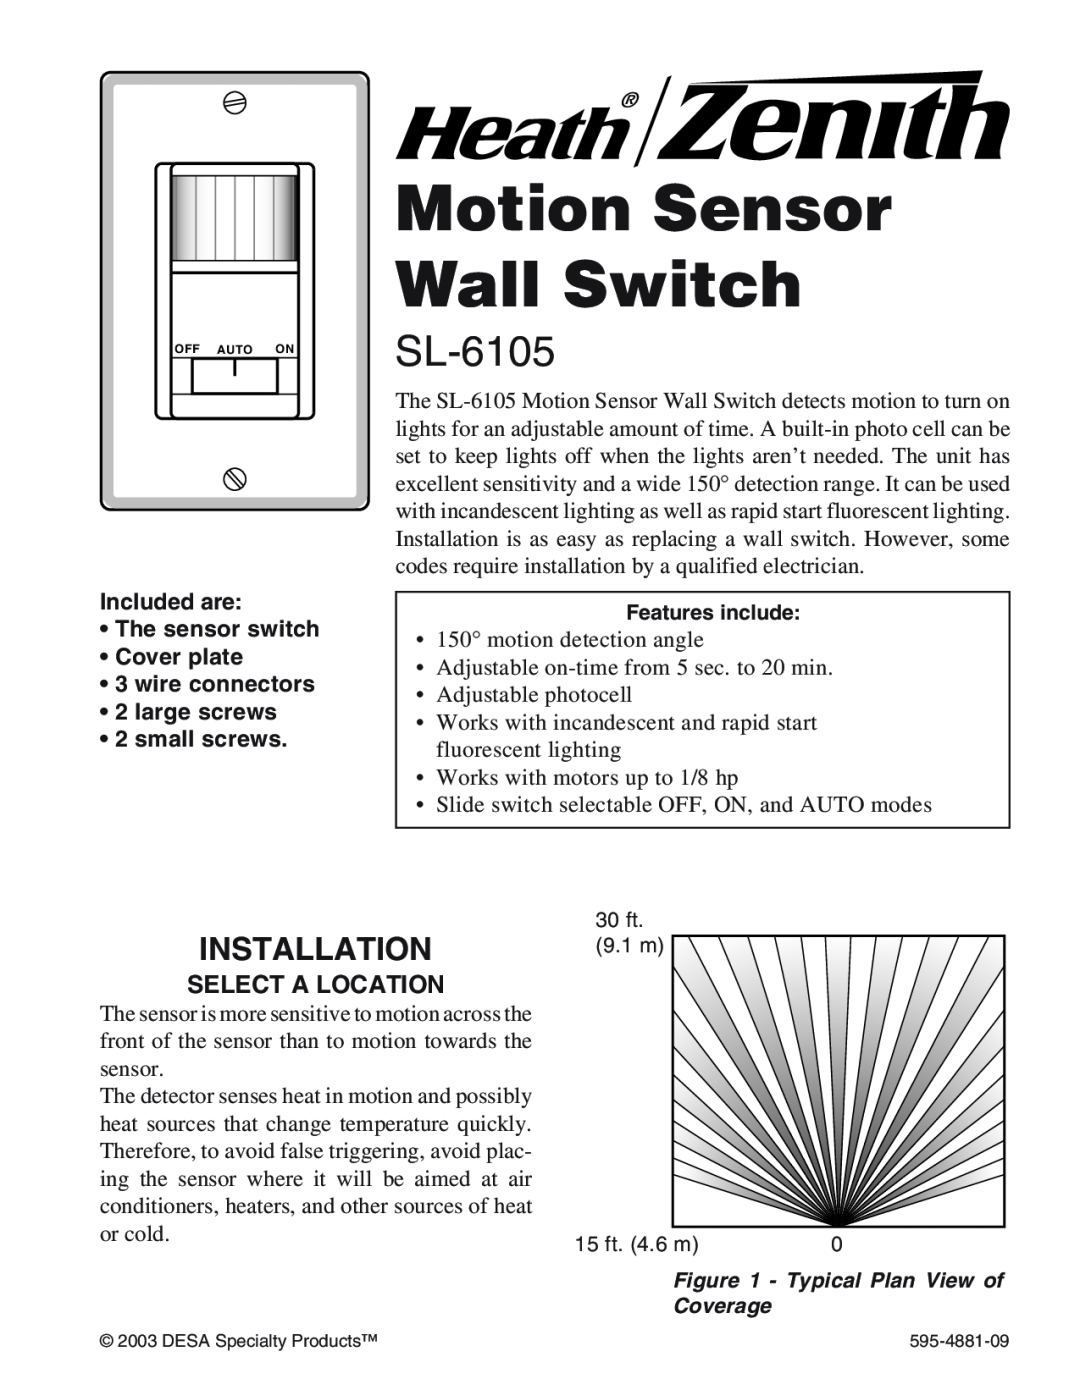 Heath Zenith SL-6105 manual Motion Sensor Wall Switch, Installation, Included are The sensor switch Cover plate 